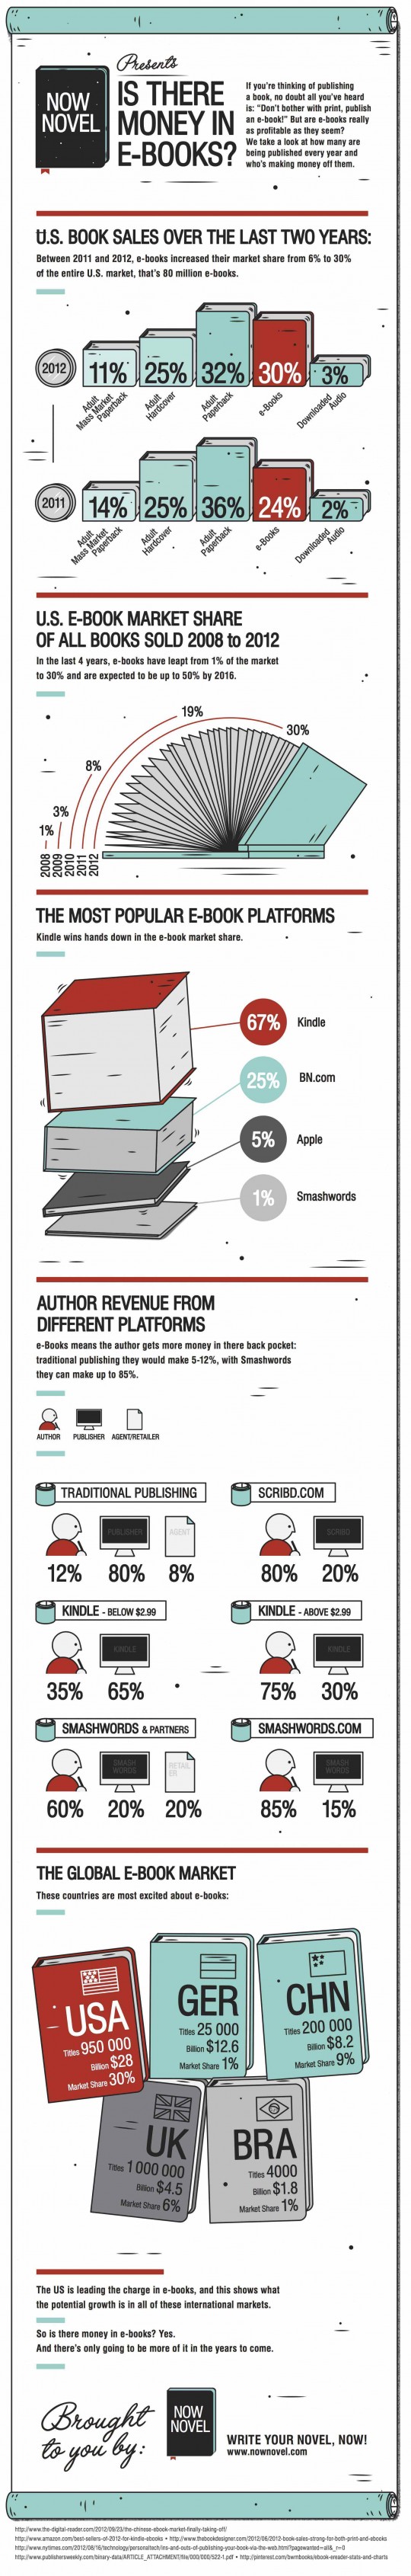 Is-there-money-in-ebooks-infographic-540x3381